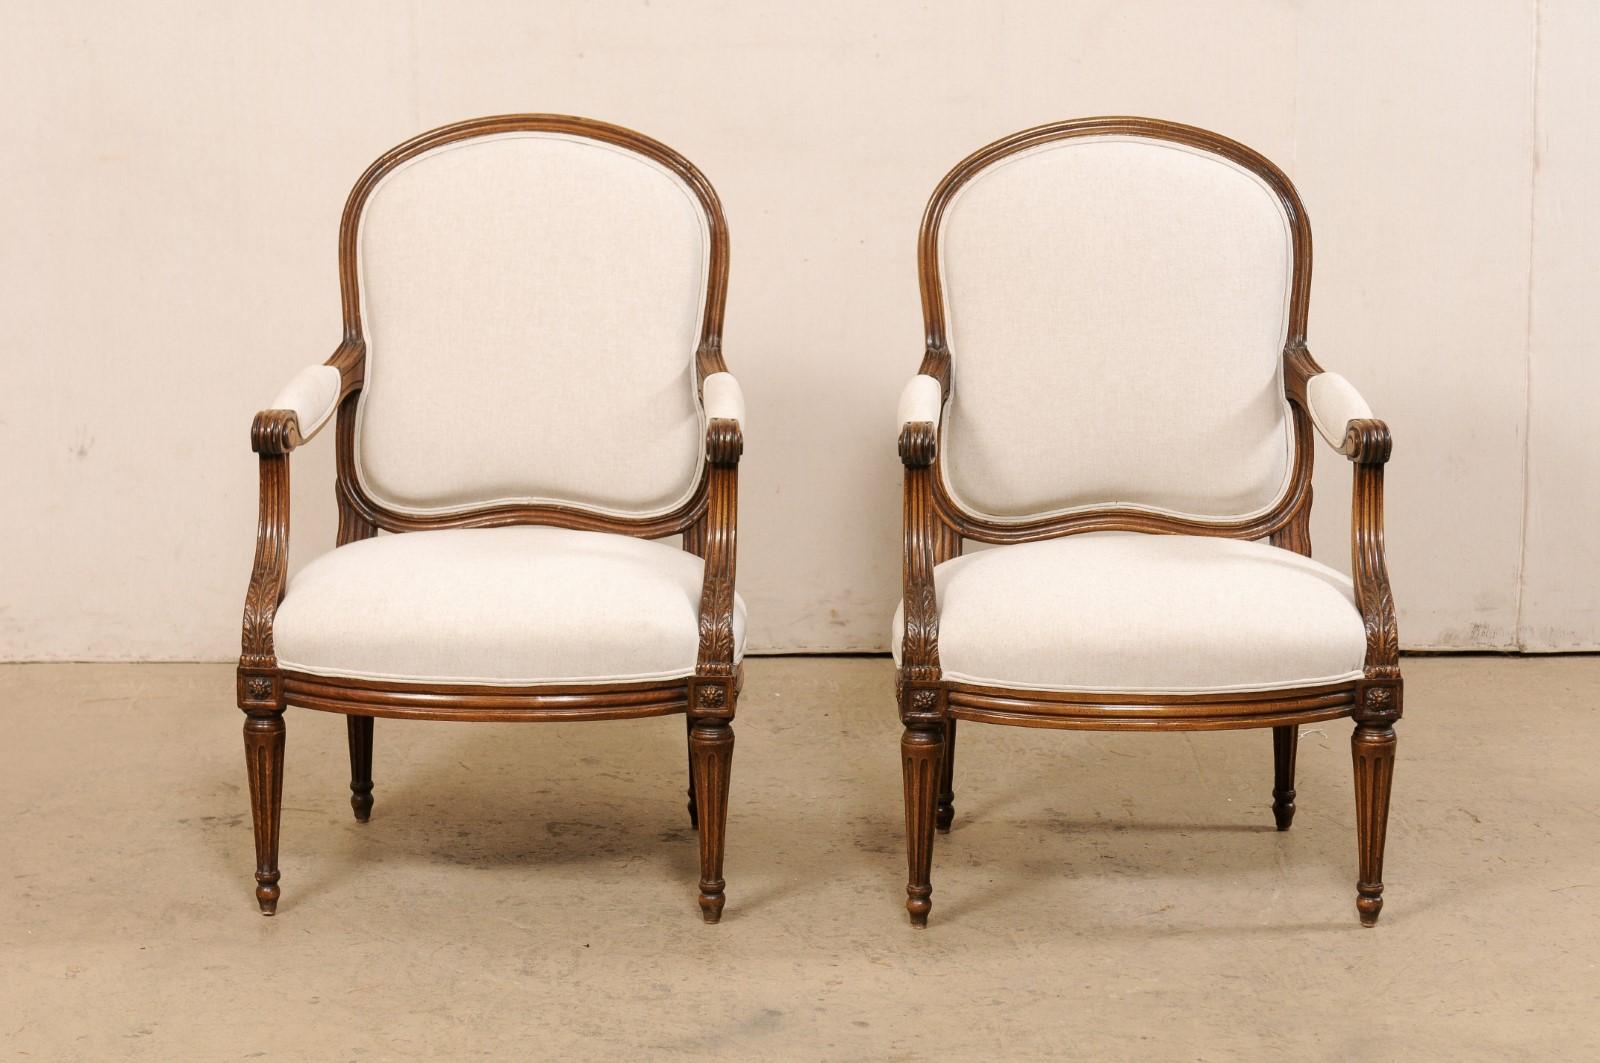 19th C. French Pair Carved-Wood Fauteuil Armchairs, Newly Upholstered in Linen For Sale 7